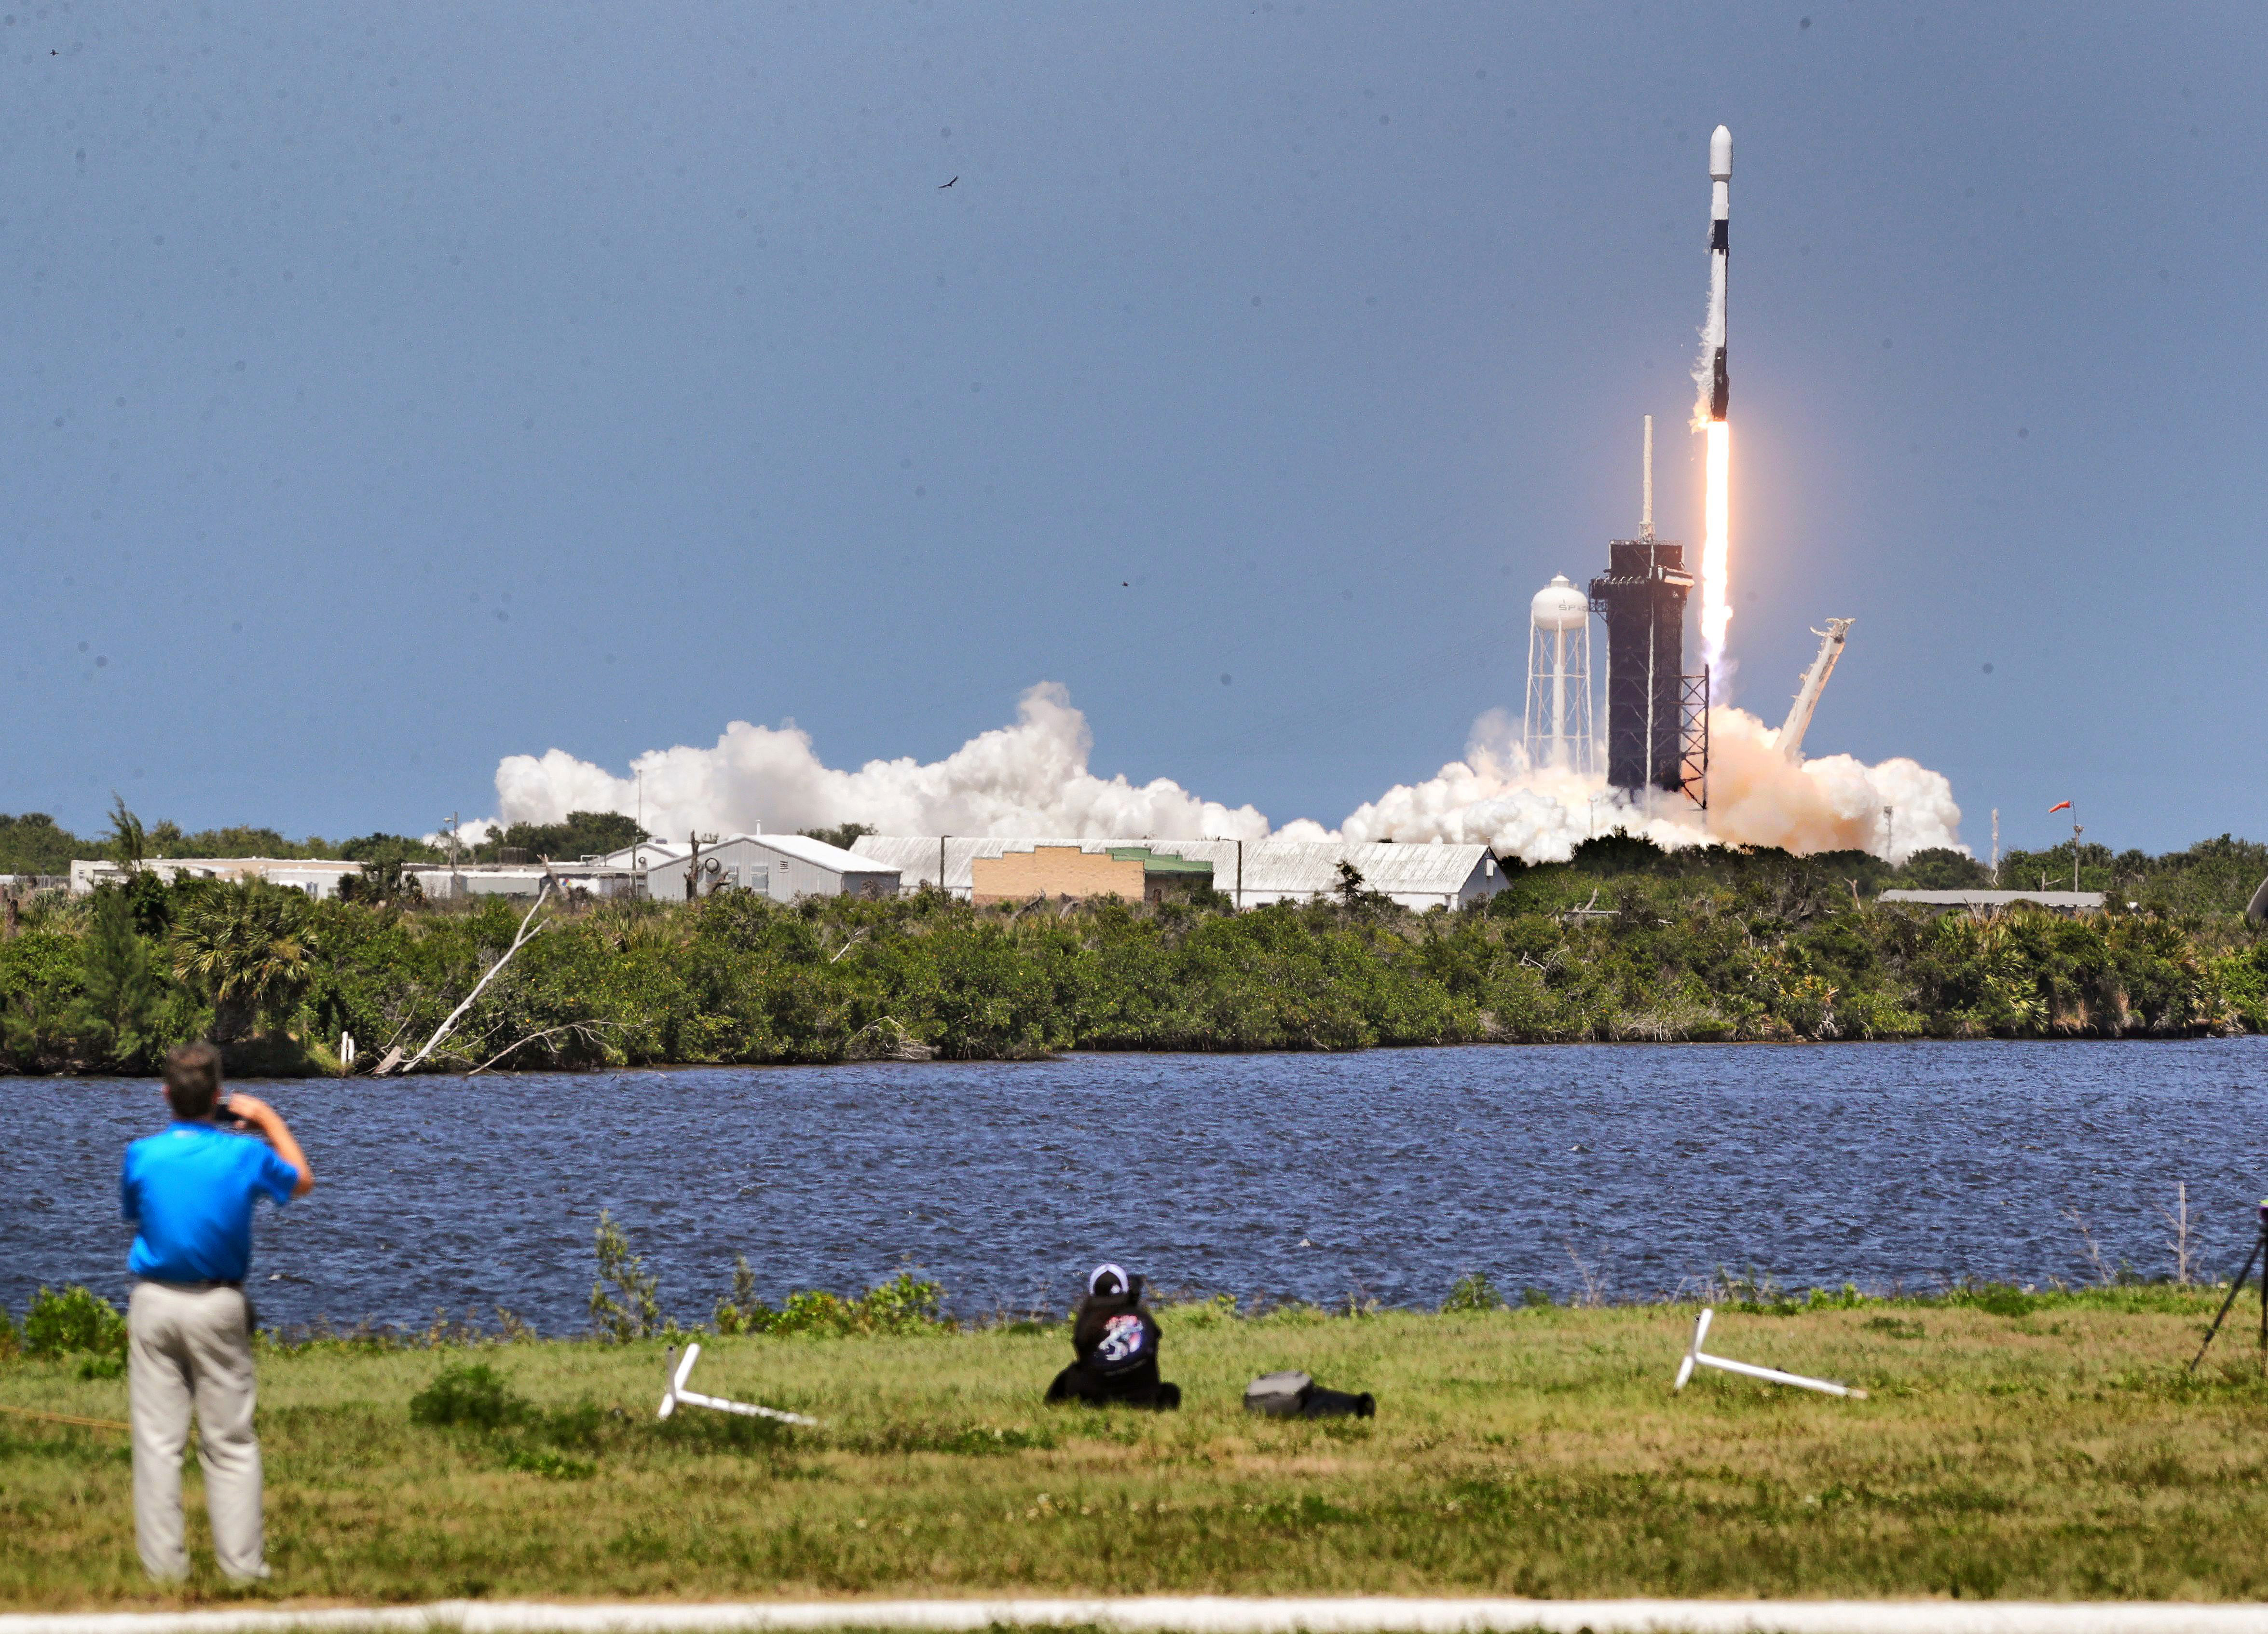 A man takes a picture as a rocket launches in daylight